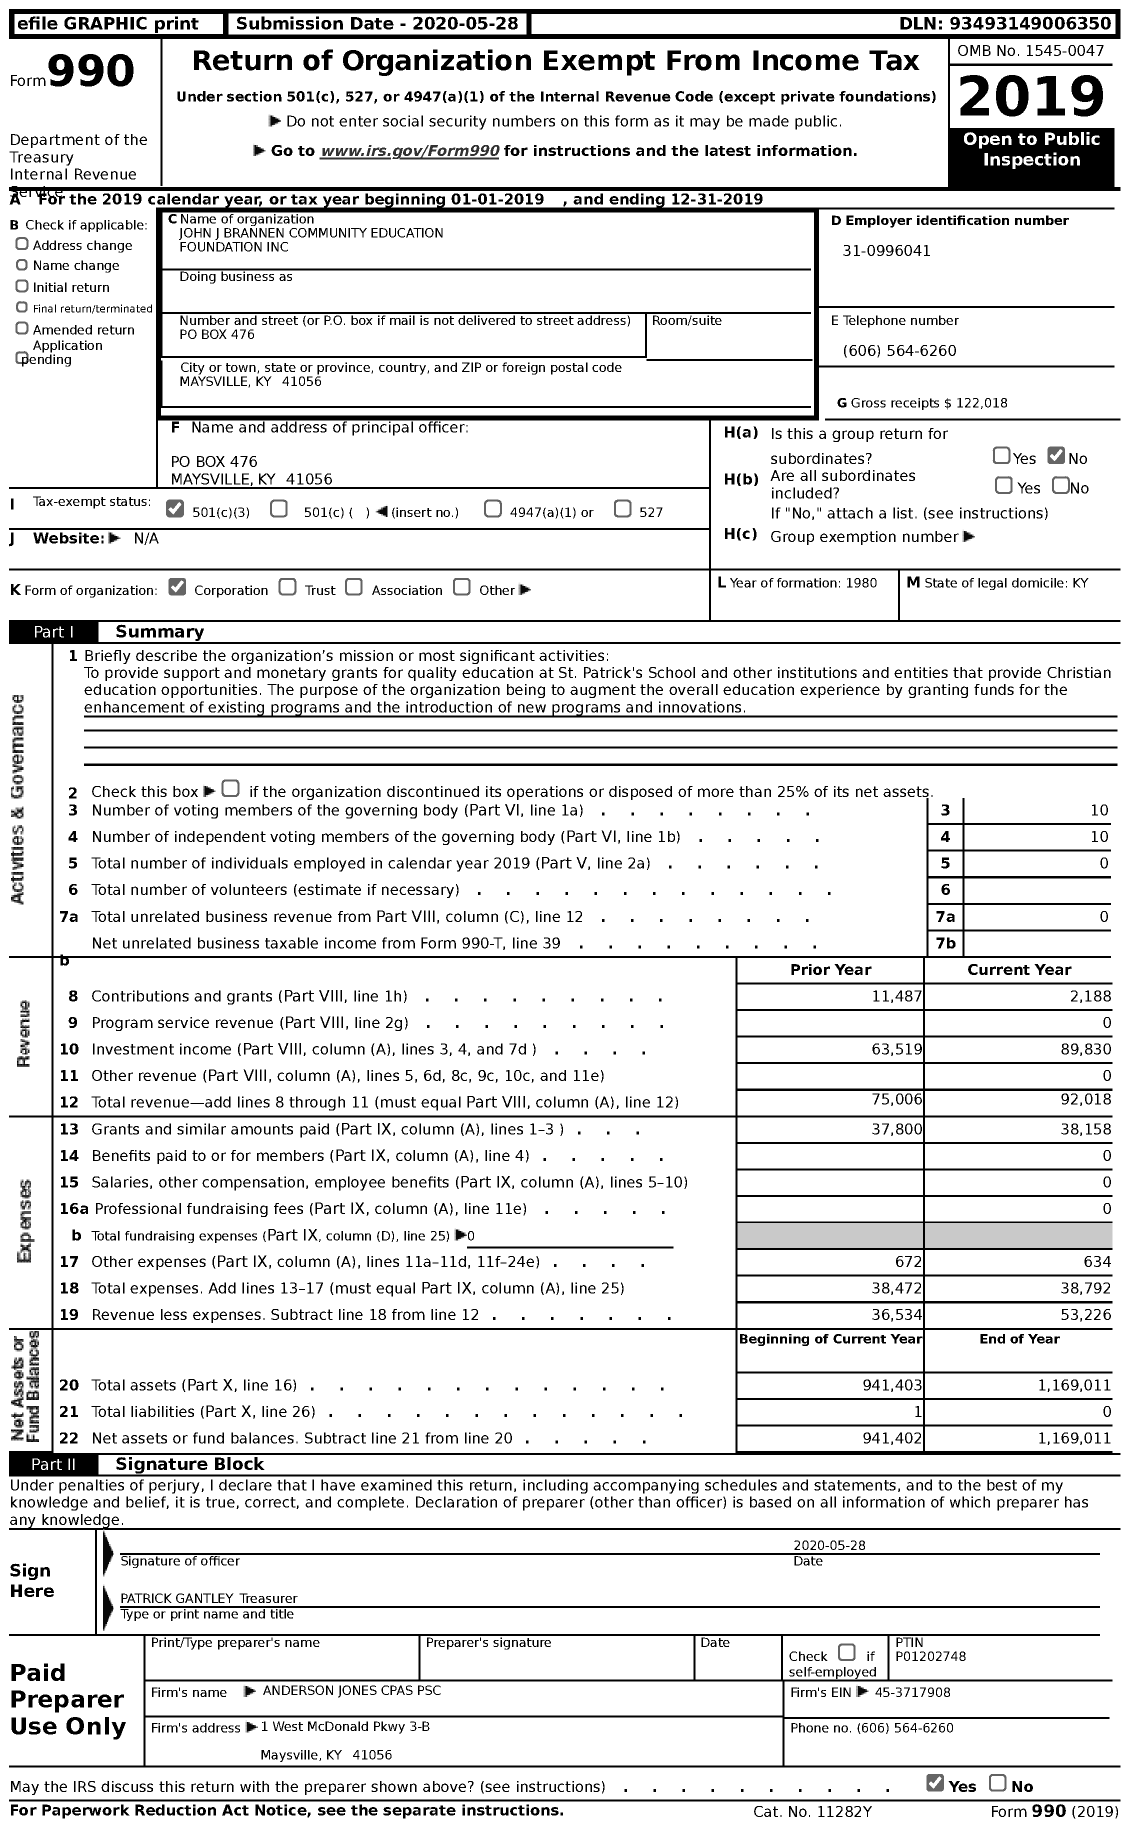 Image of first page of 2019 Form 990 for John J Brannen Community Education Foundation